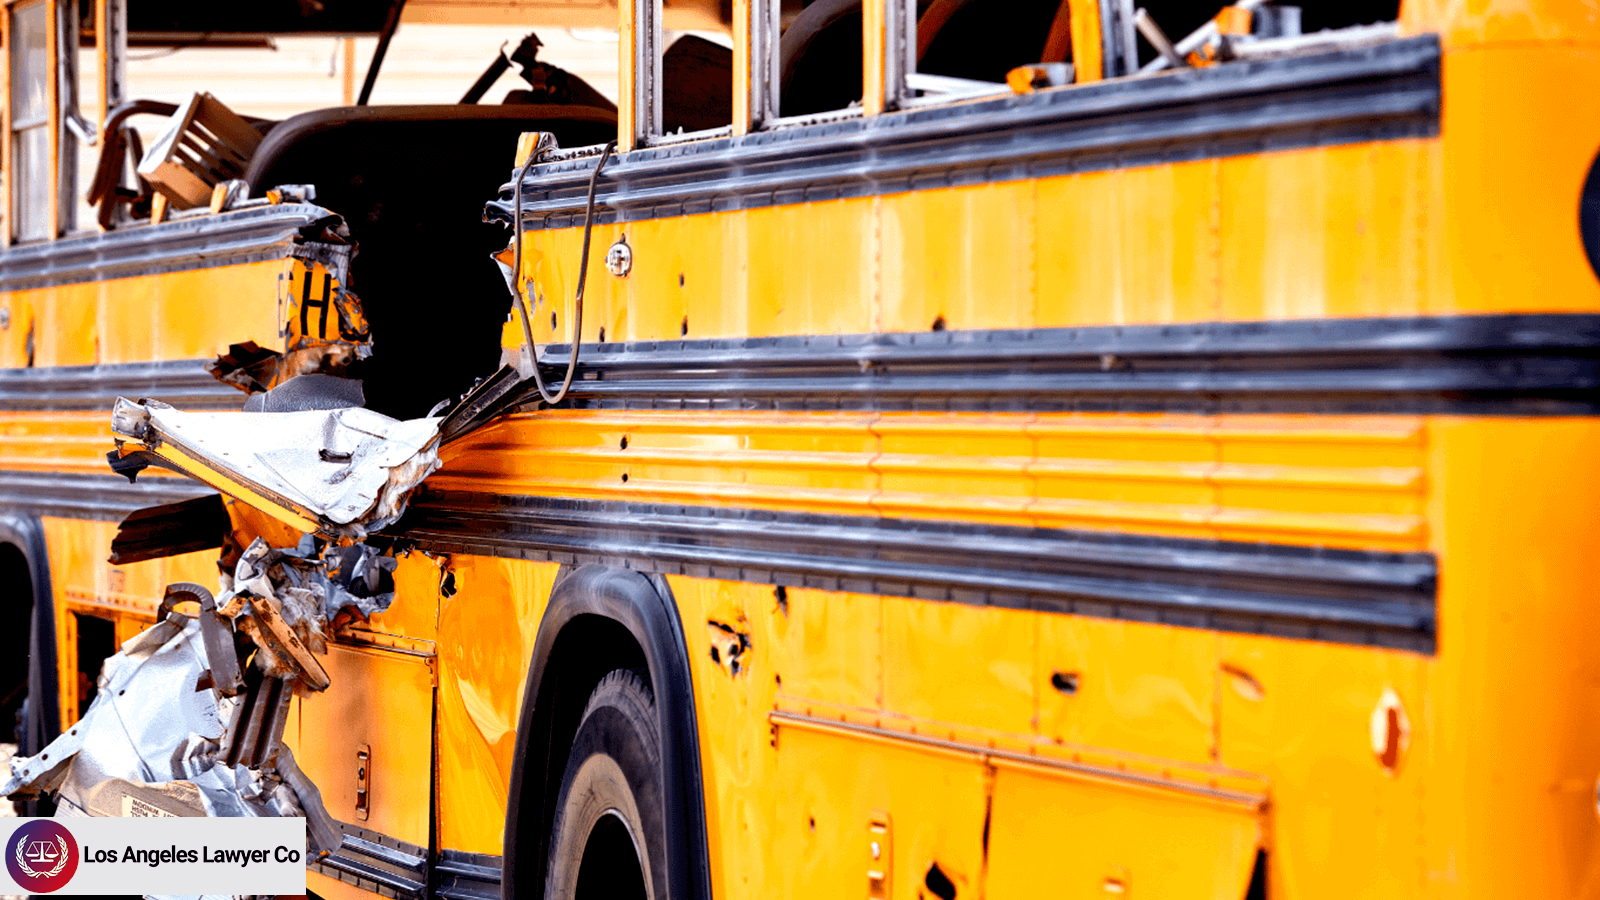 How Common Are School Bus Accidents?